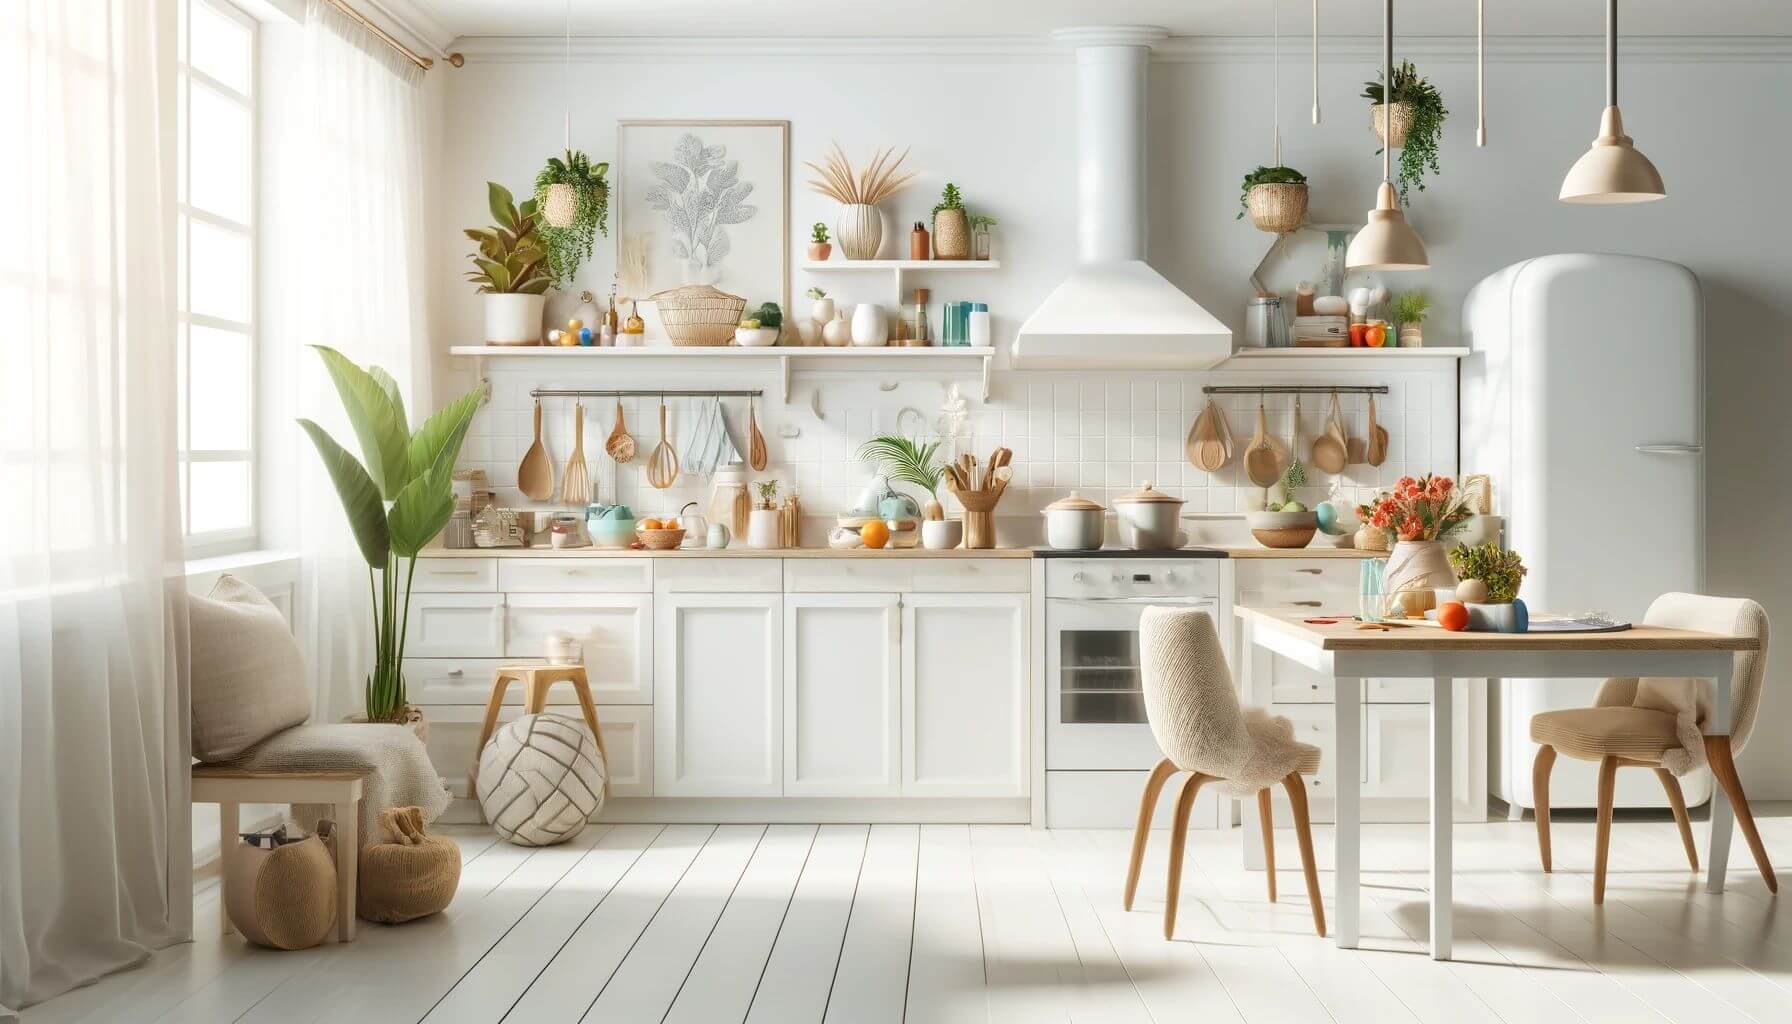 How To Decorate A White Kitchen Without Renovating